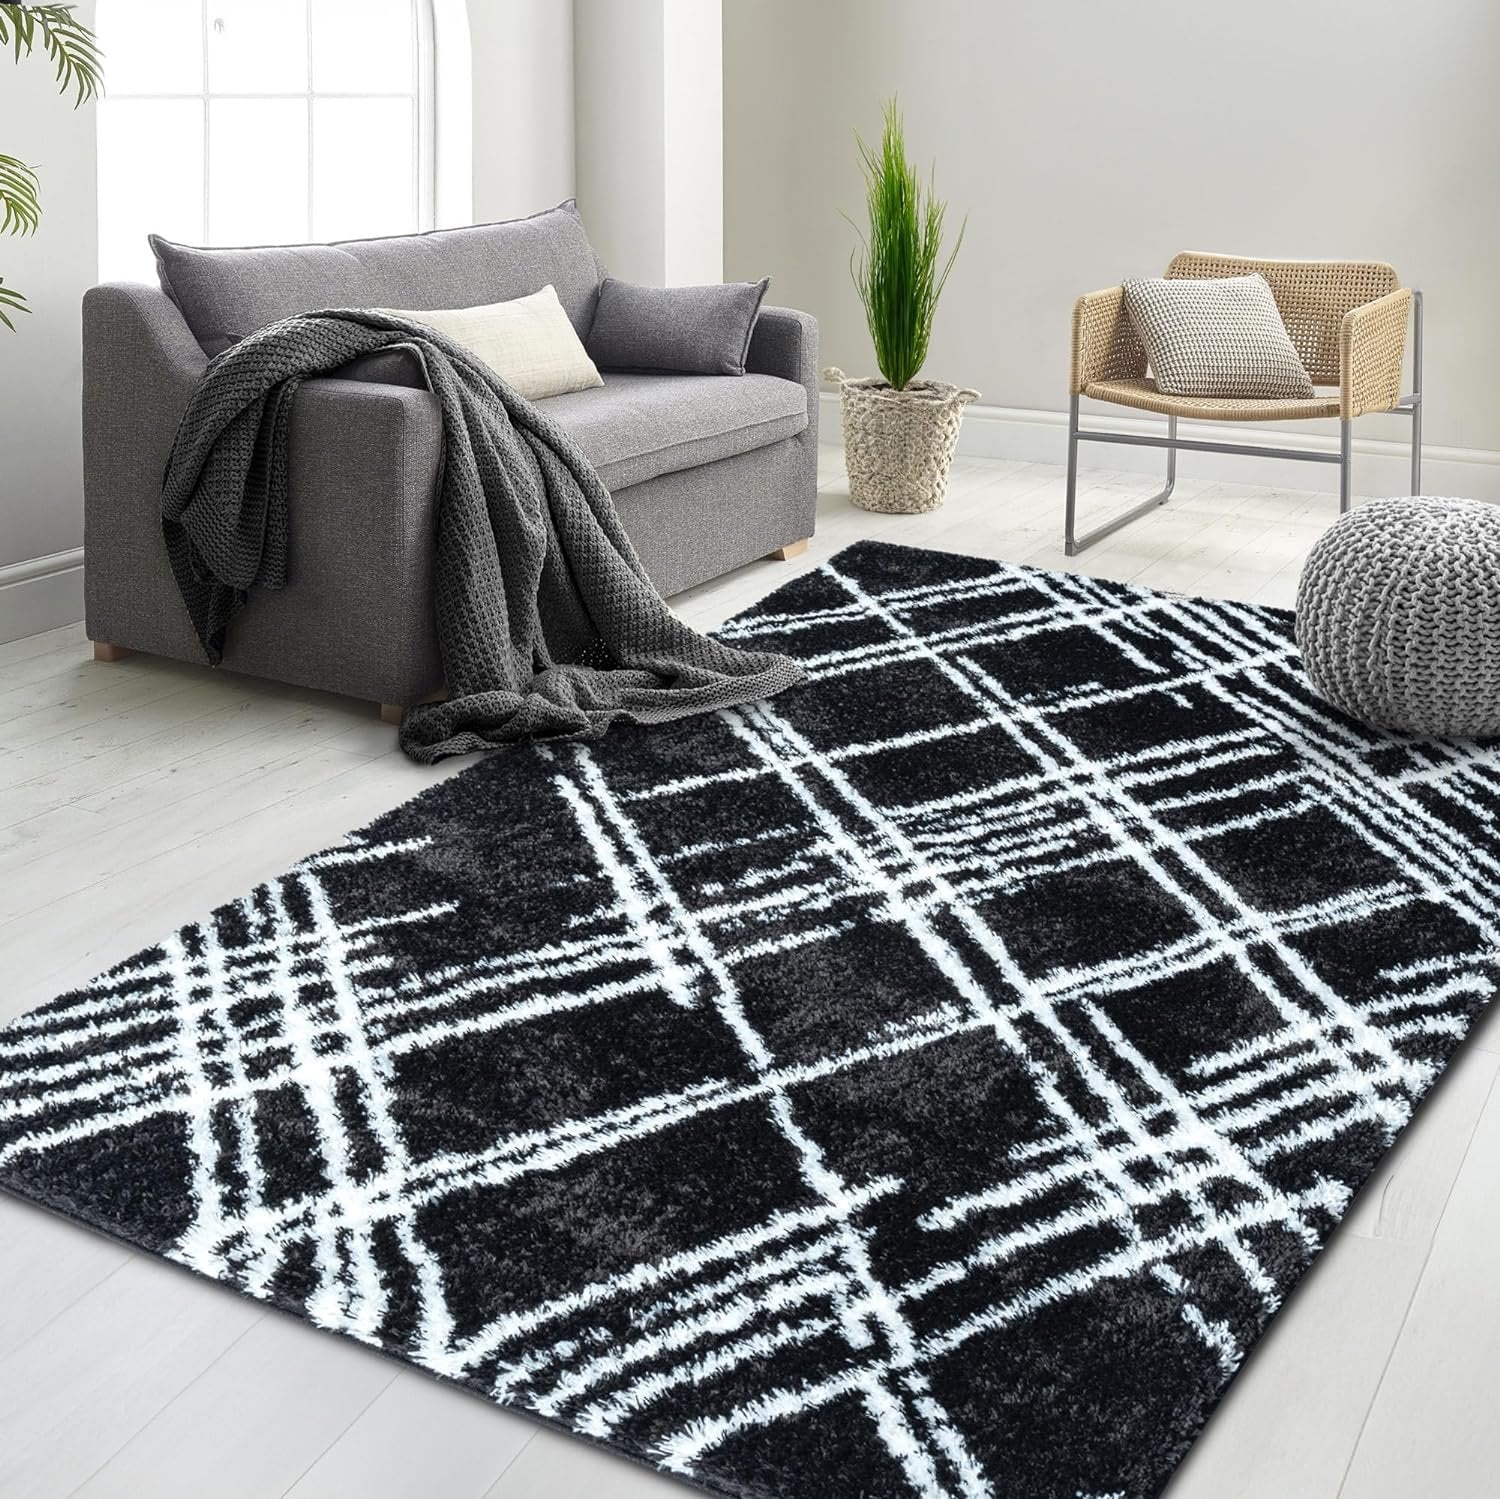 HR Chic Geometric Diamond-Patterned Shag Rug - Plush High-Pile Luxury Area Rug in Neutral Grey and White #26229